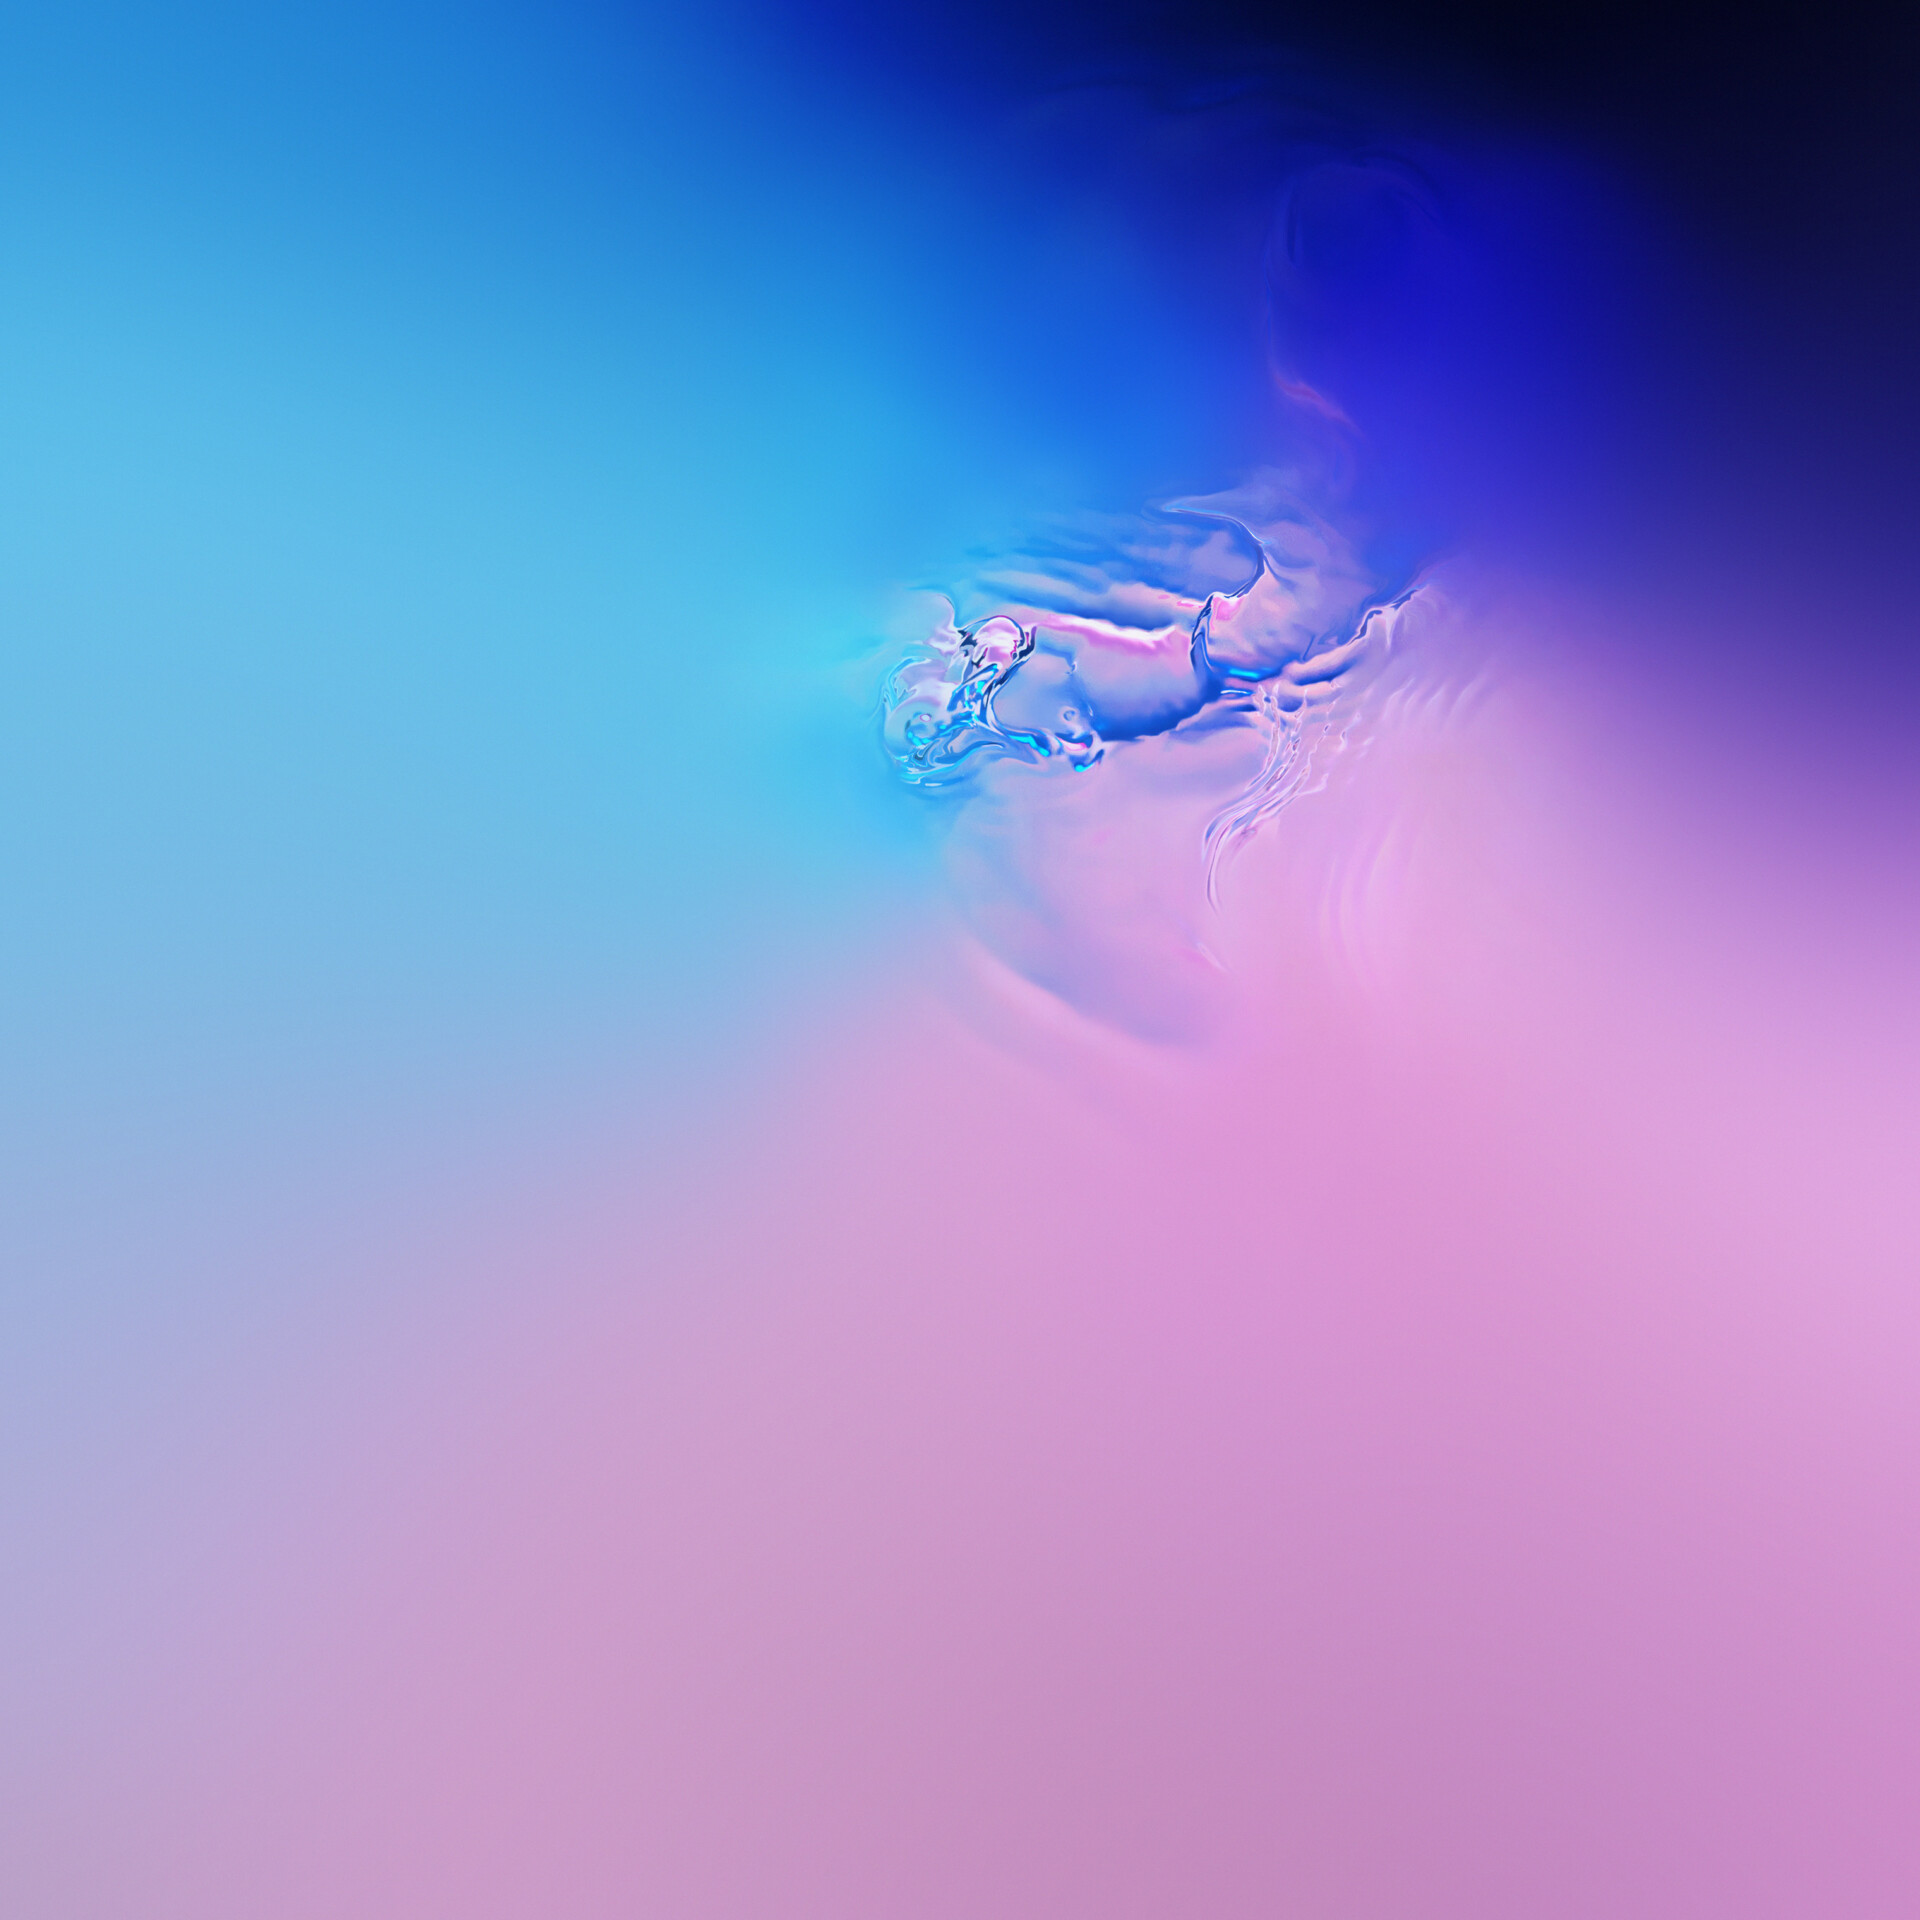 Samsung Galaxy S10 wallpapers are here Grab them at full resolution 1920x1920